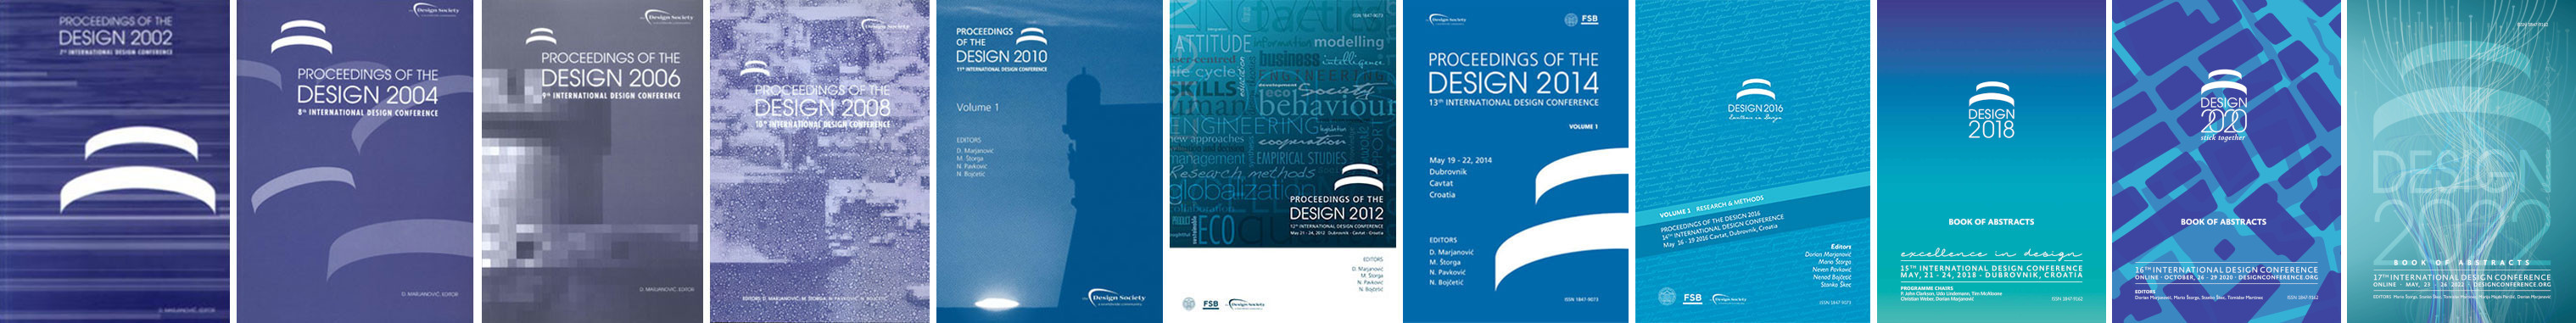 DESIGN Conference - Proceedings